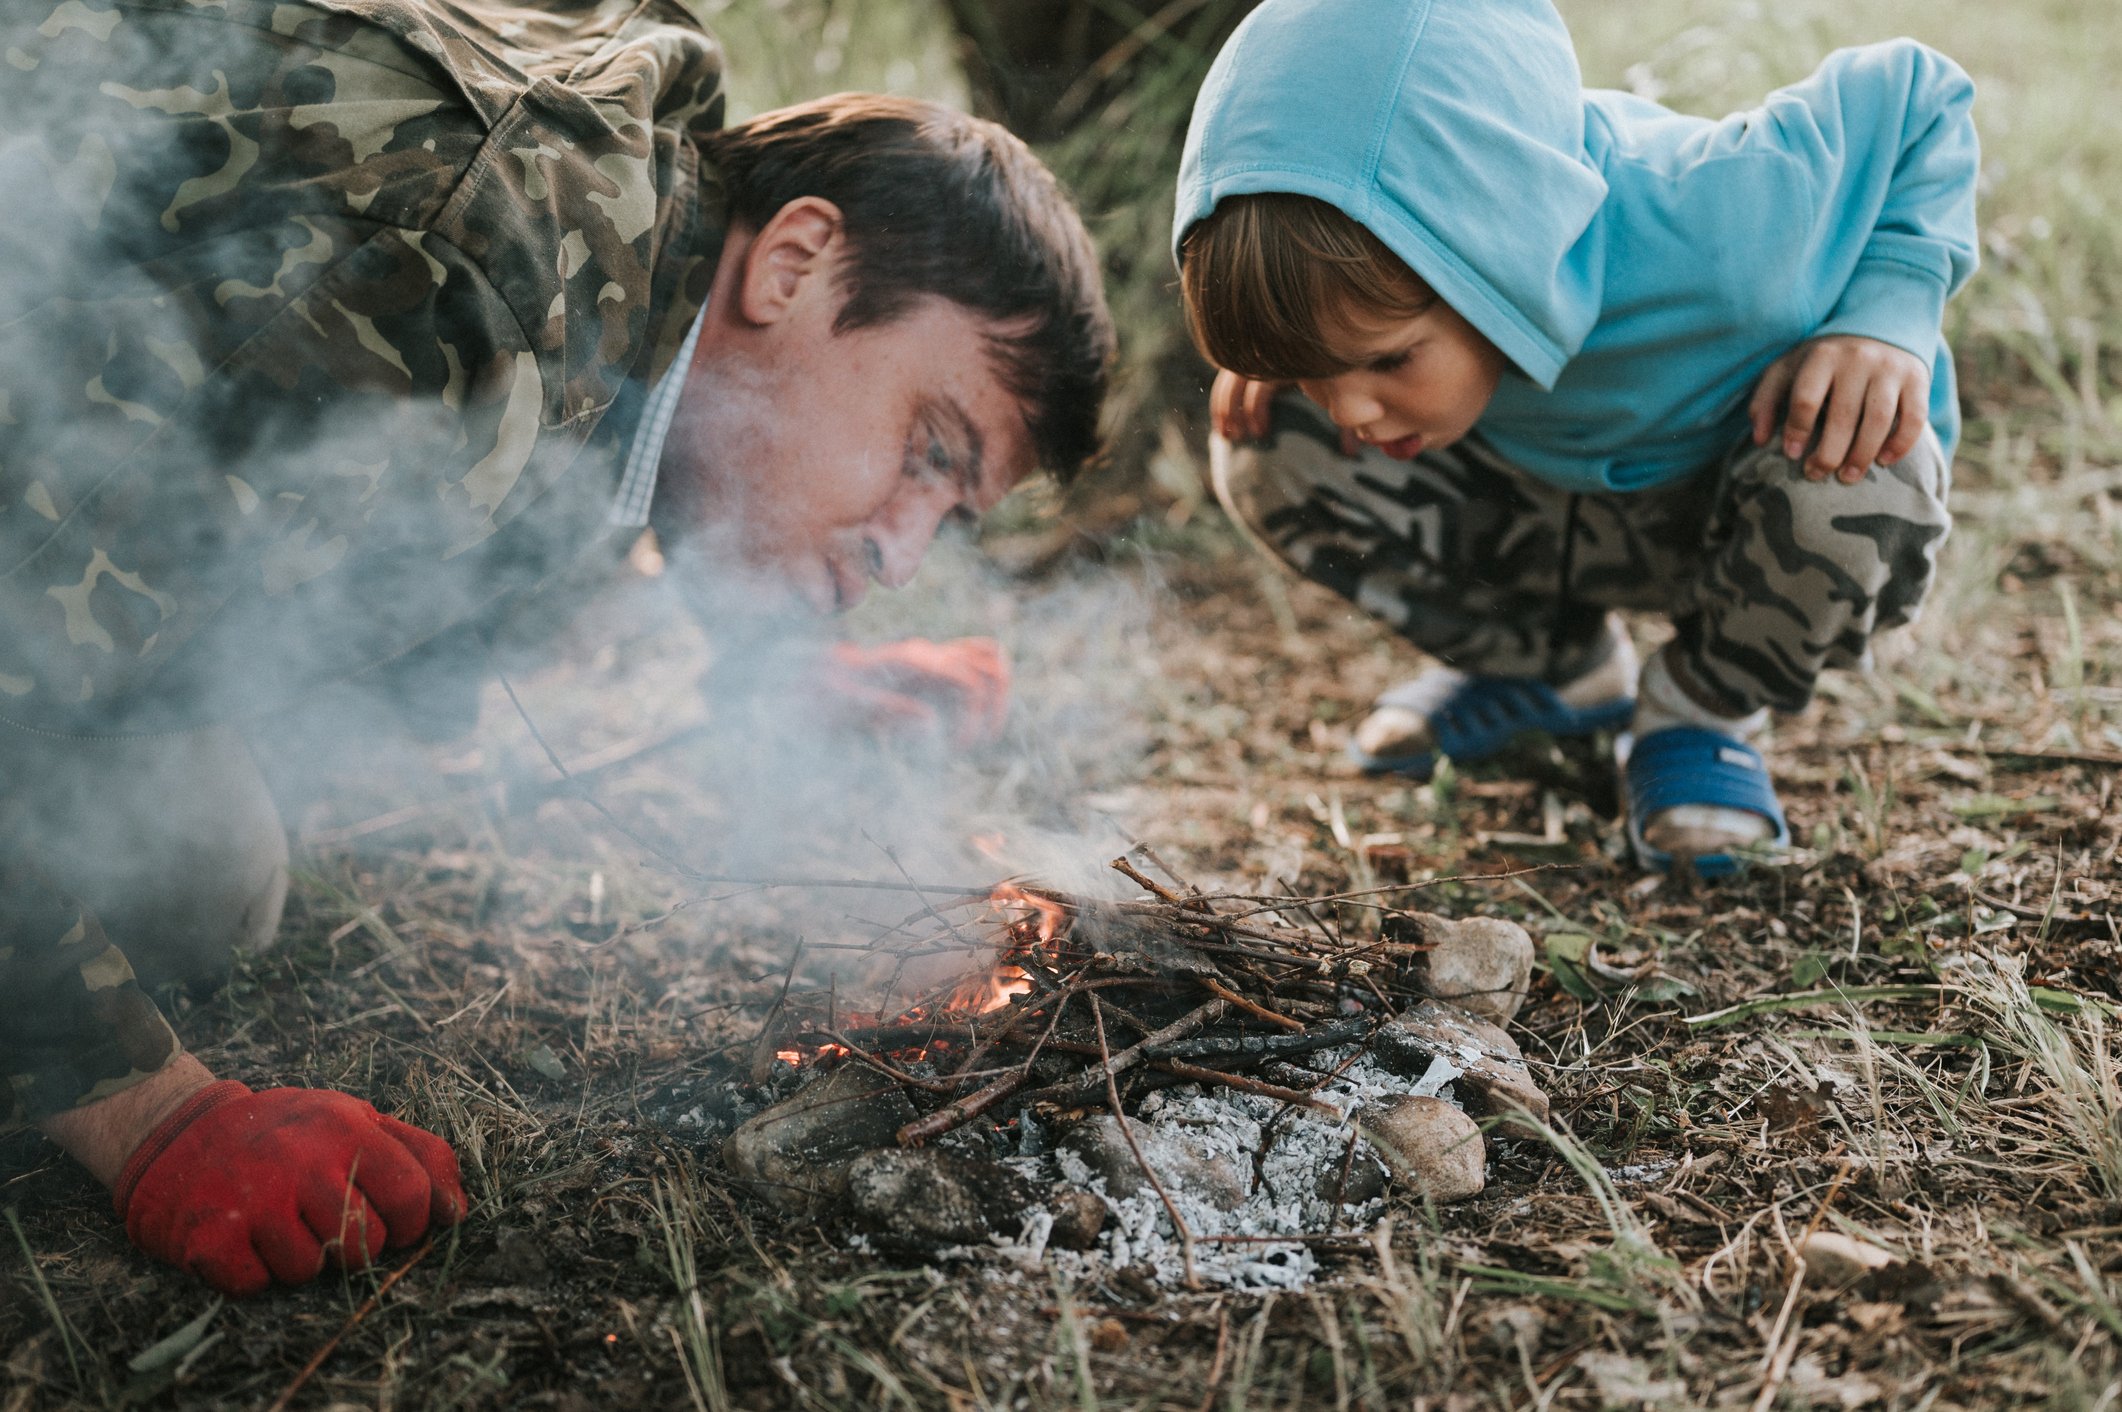 How to Teach Kids to Build A Campfire Safely: A Step-By-Step Guide